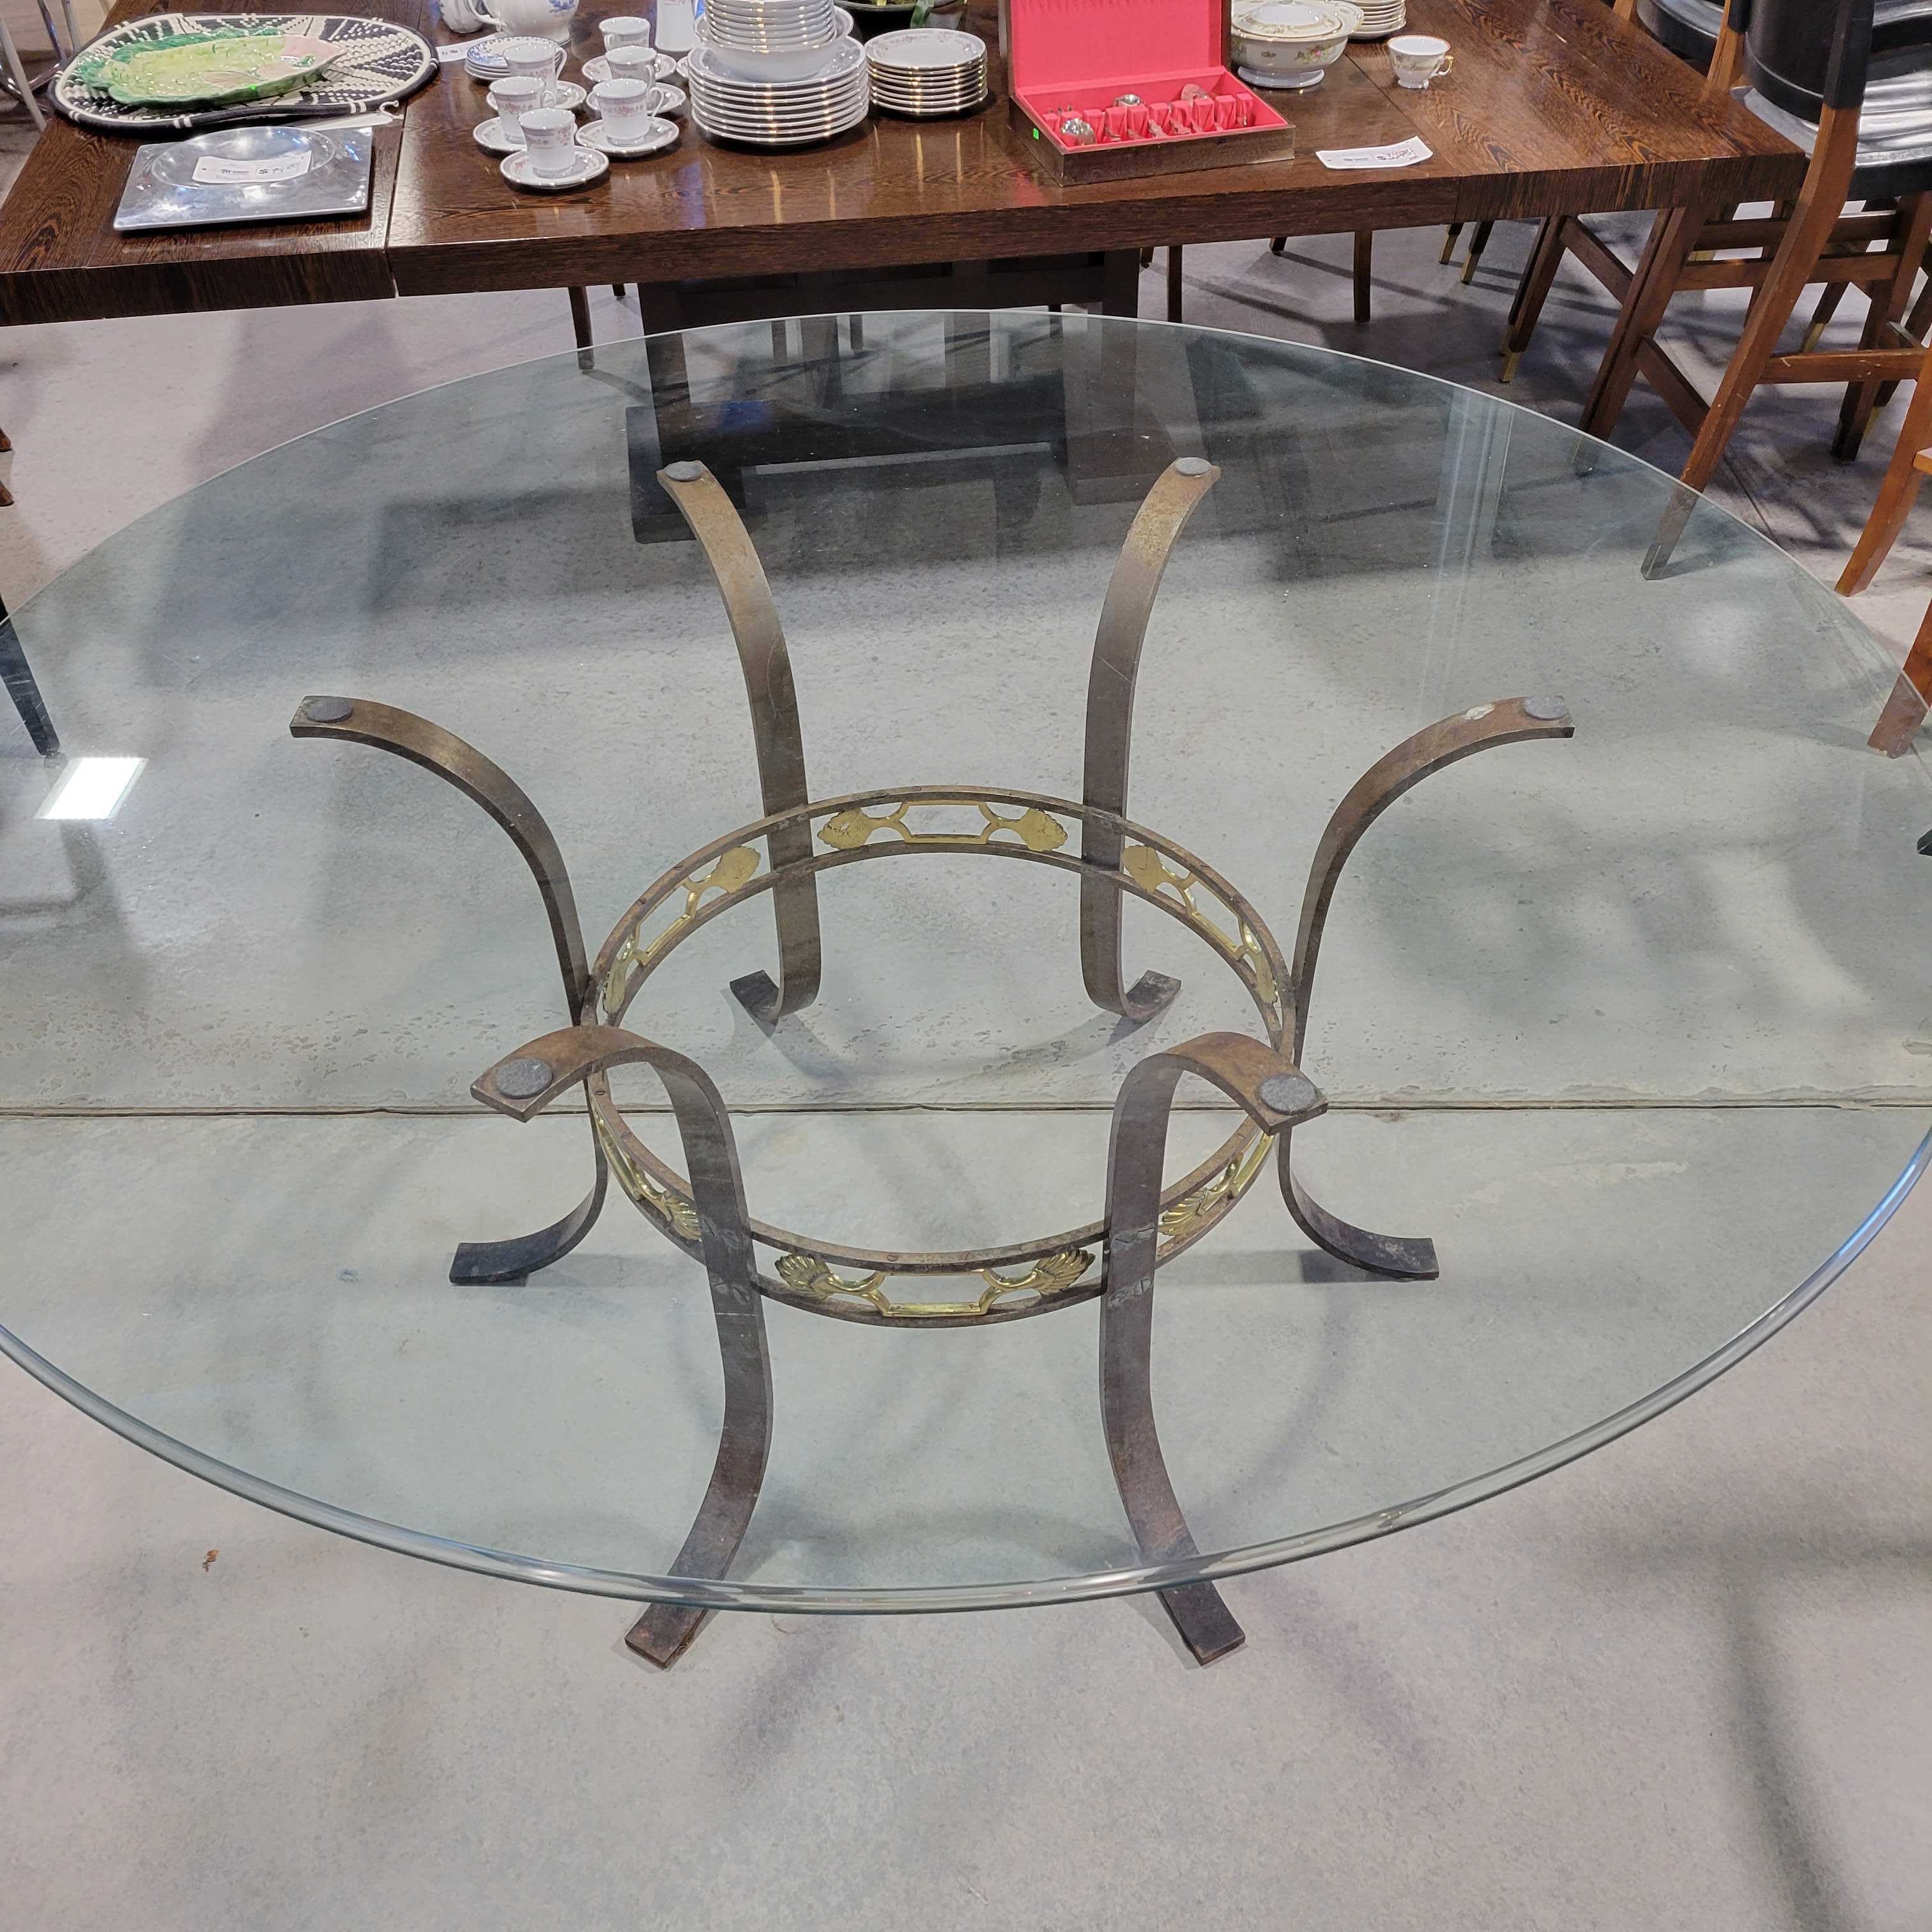 Heavy Iron & Brass Ornate Detail Round Glass Top Dining Table